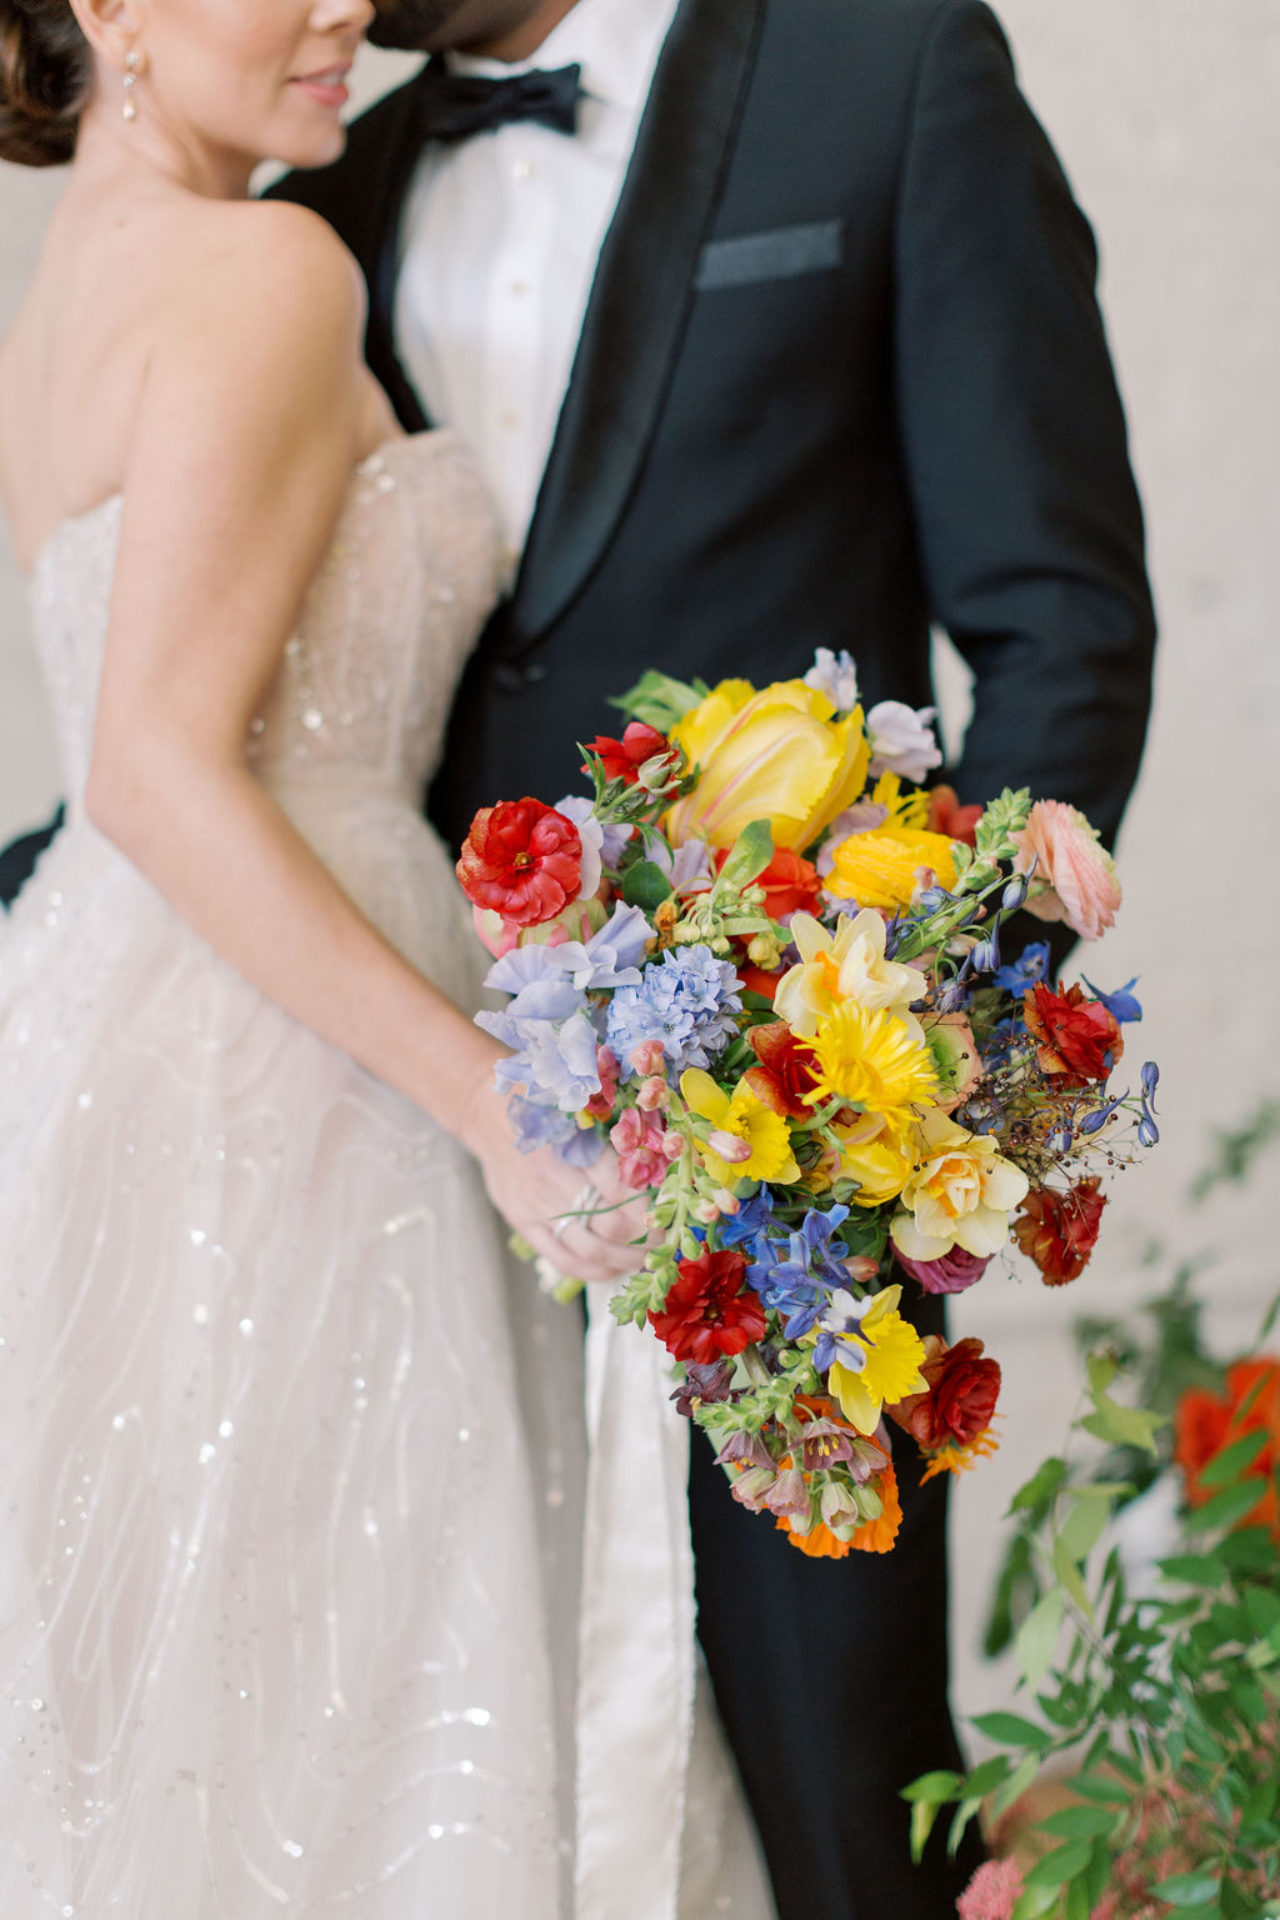 Wedding couple in white & black holding a vibrant bouquet of yellow, red and blues in Tampa, FL